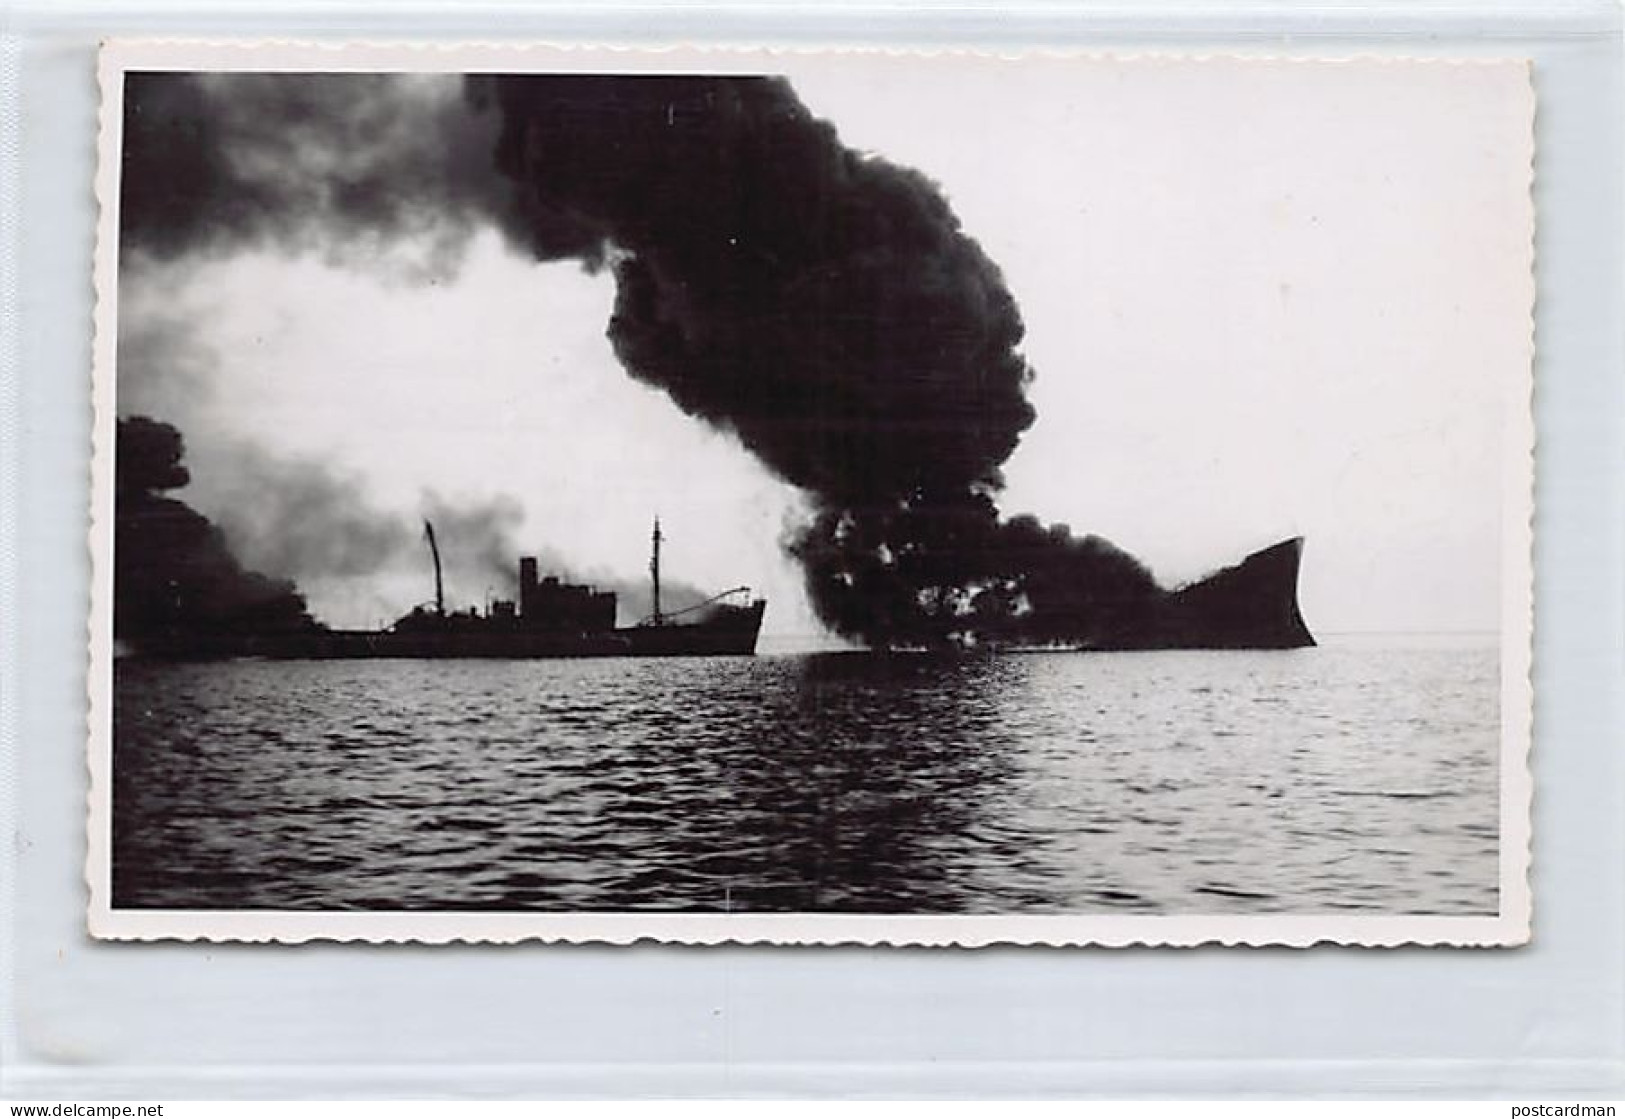 Egypt - Liberian Oil Tanker Burning In The Gulf Of Alexandria In 1963 - REAL PHOTO - Publ. Unknown  - Alexandria